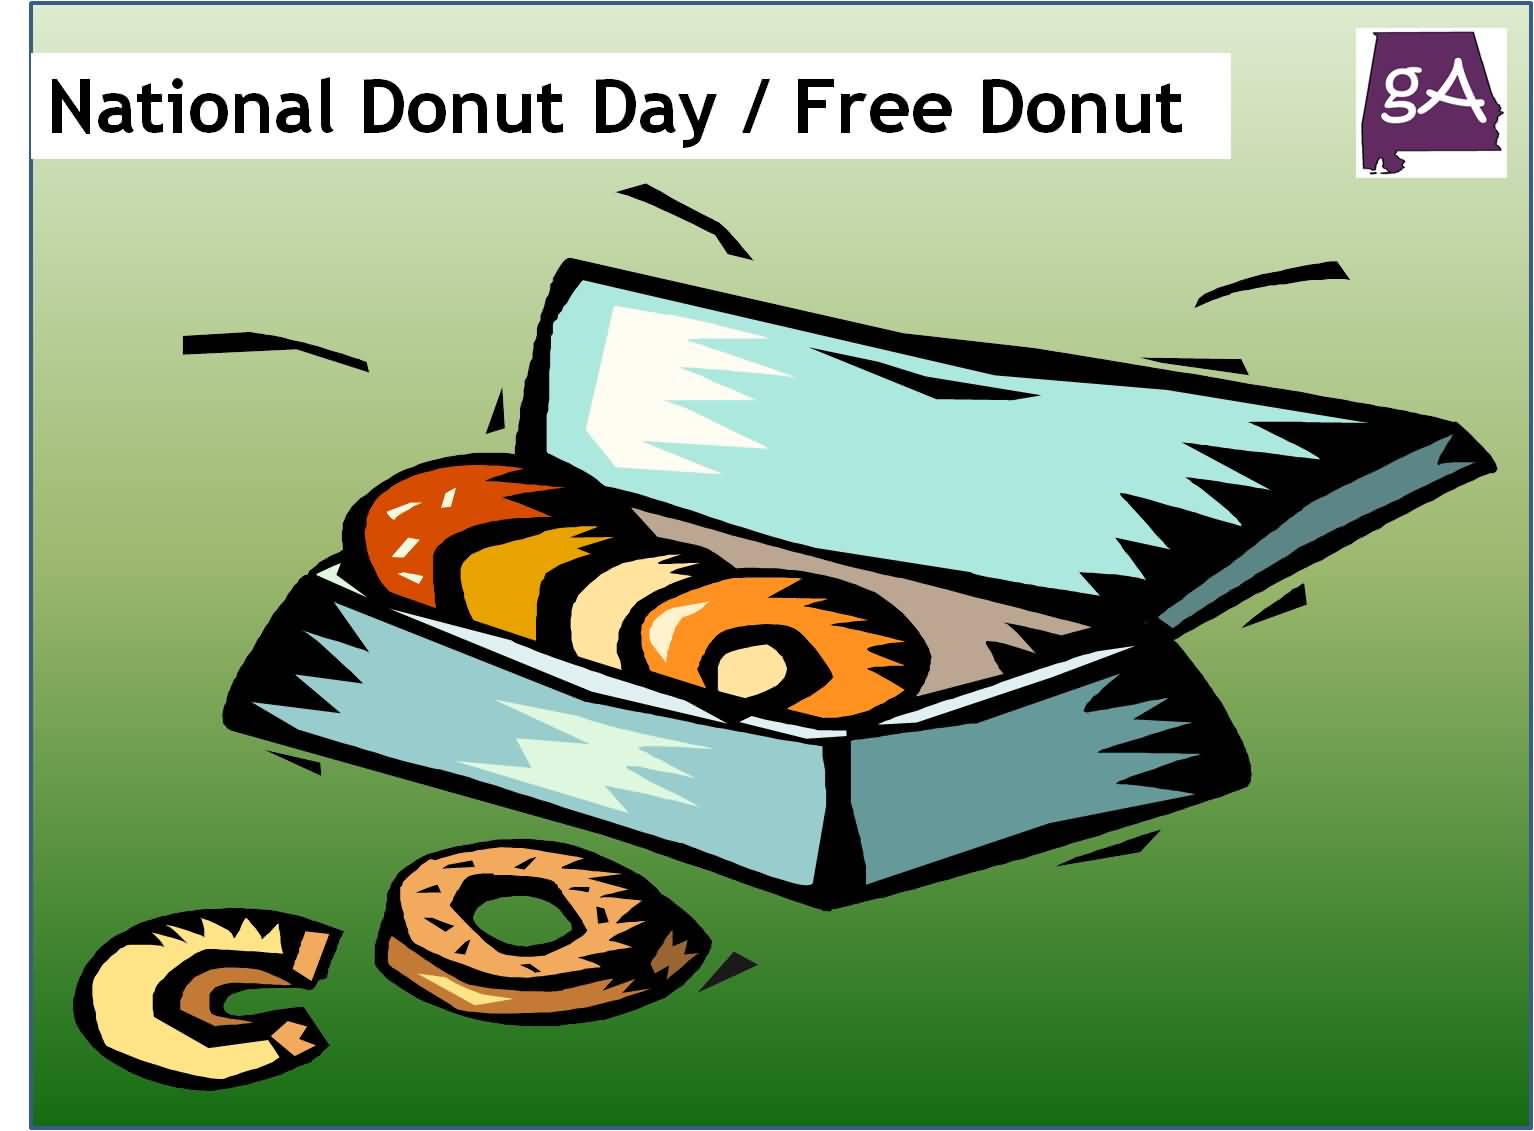 National Doughnut Day 2016 Free Donut Clipart Image